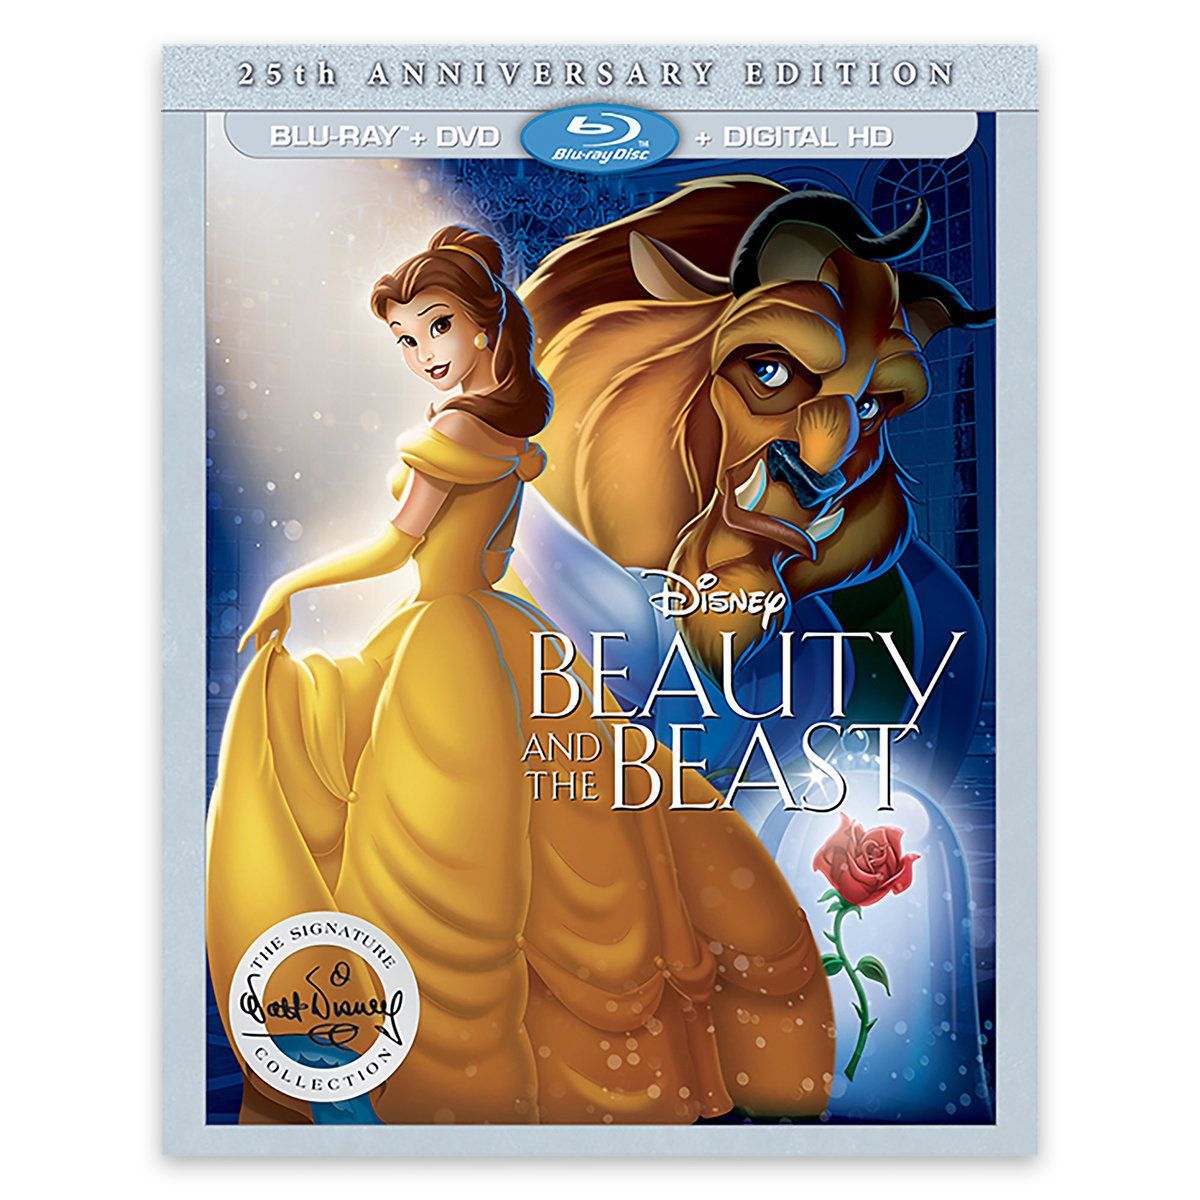 Beauty and the Beast 25th Anniversary Edition Blu-ray Combo Pack | shopDisney - Beauty and the Beast 25th Anniversary Edition Blu-ray Combo Pack | shopDisney -   10 beauty And The Beast animated ideas